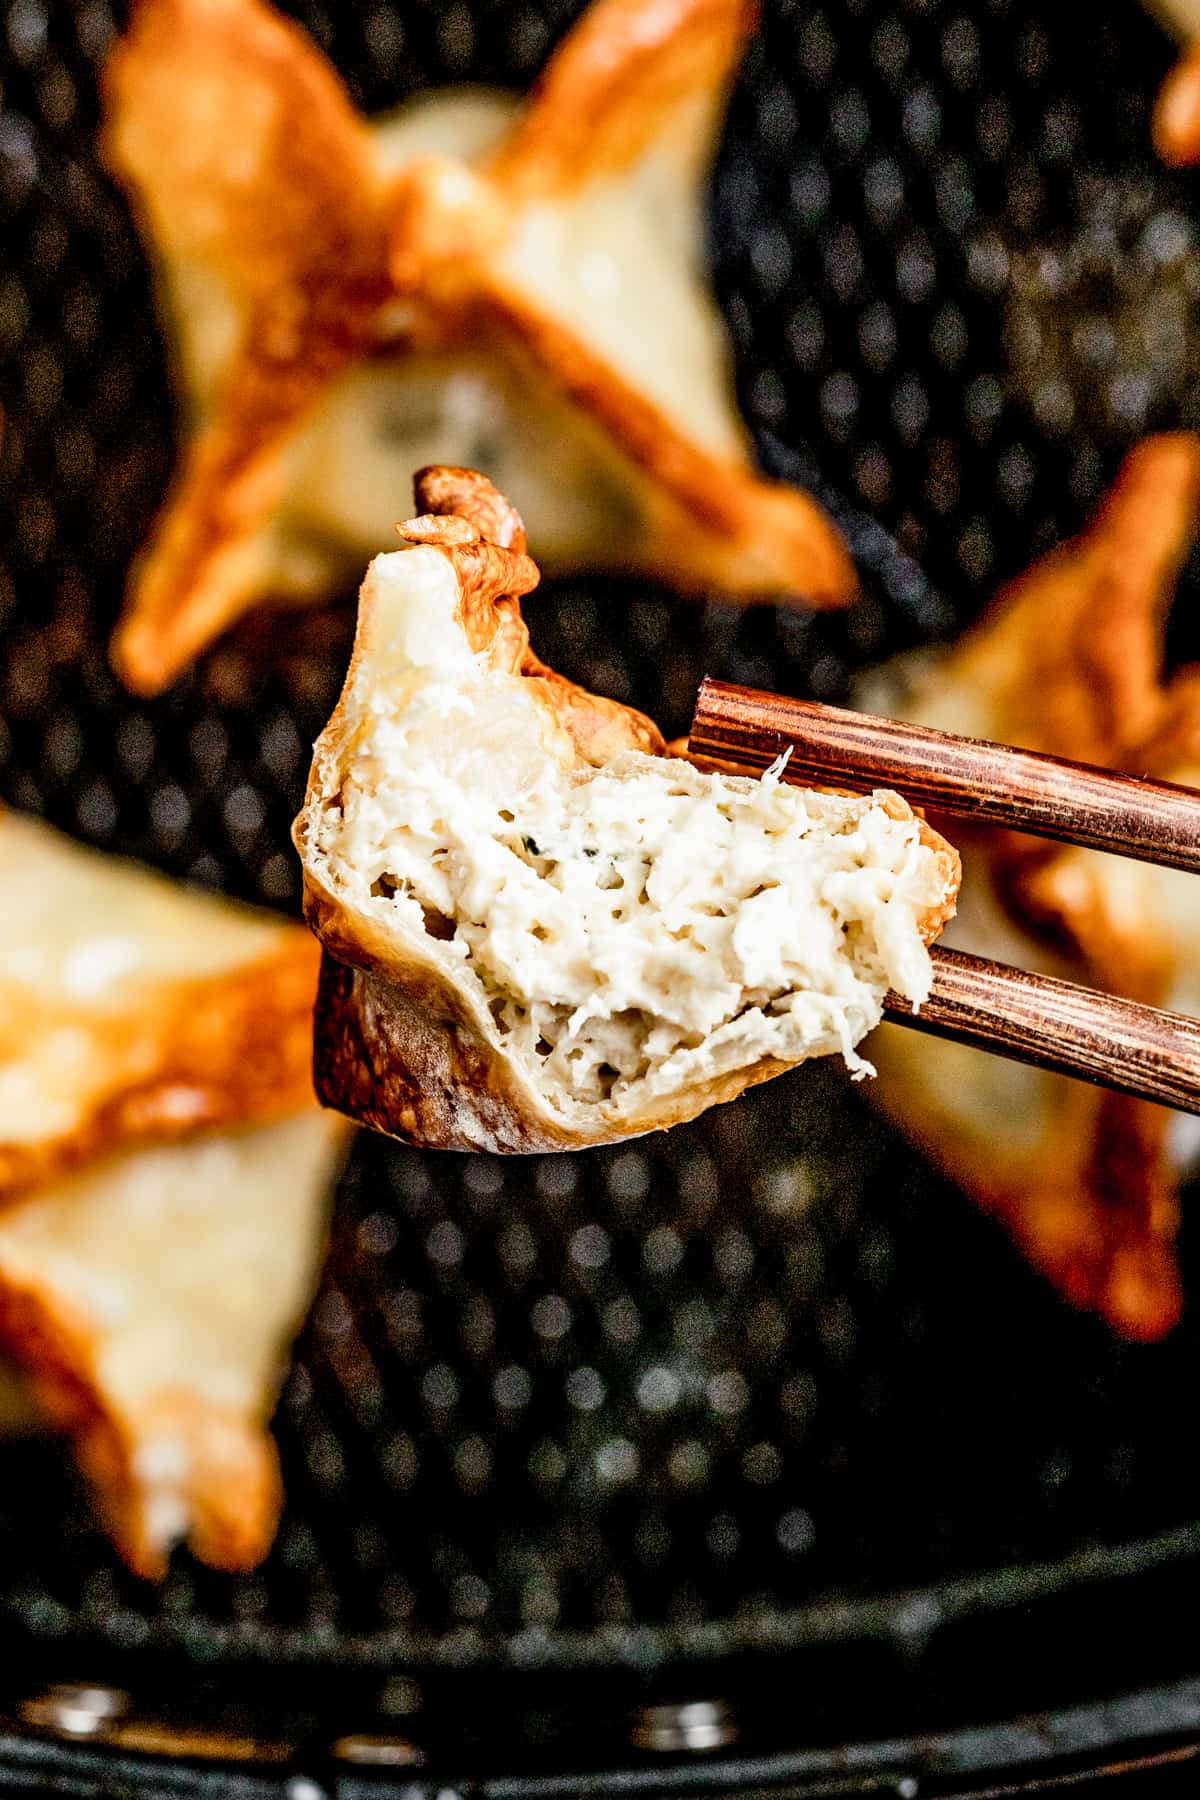 Using chopsticks to pick up a piece of crab rangoon with a bite taken out of it above an air fryer.